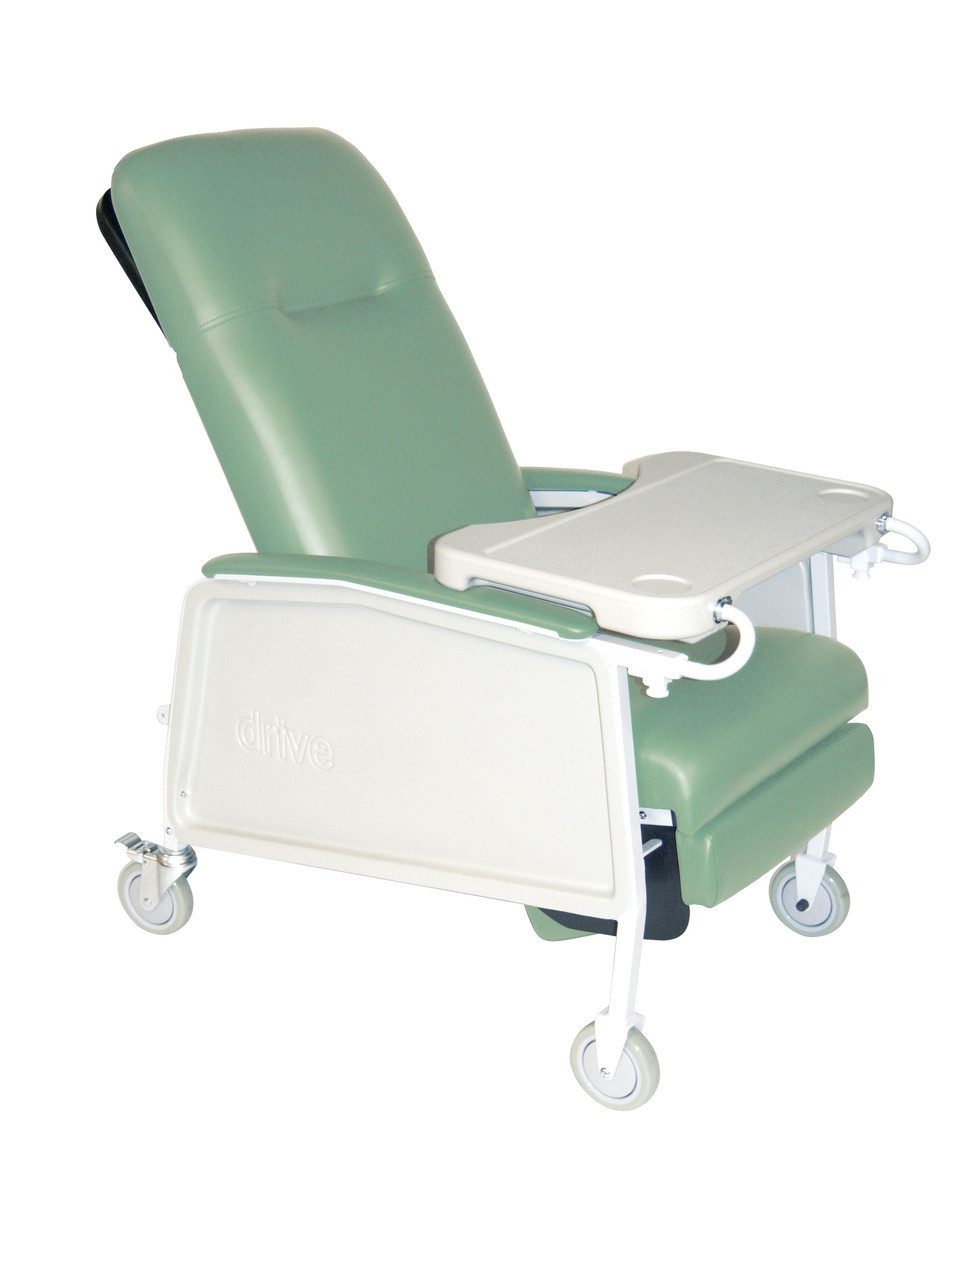 YA-DS-R03 Three-Position Reclining Blood Draw Chair with Footrest